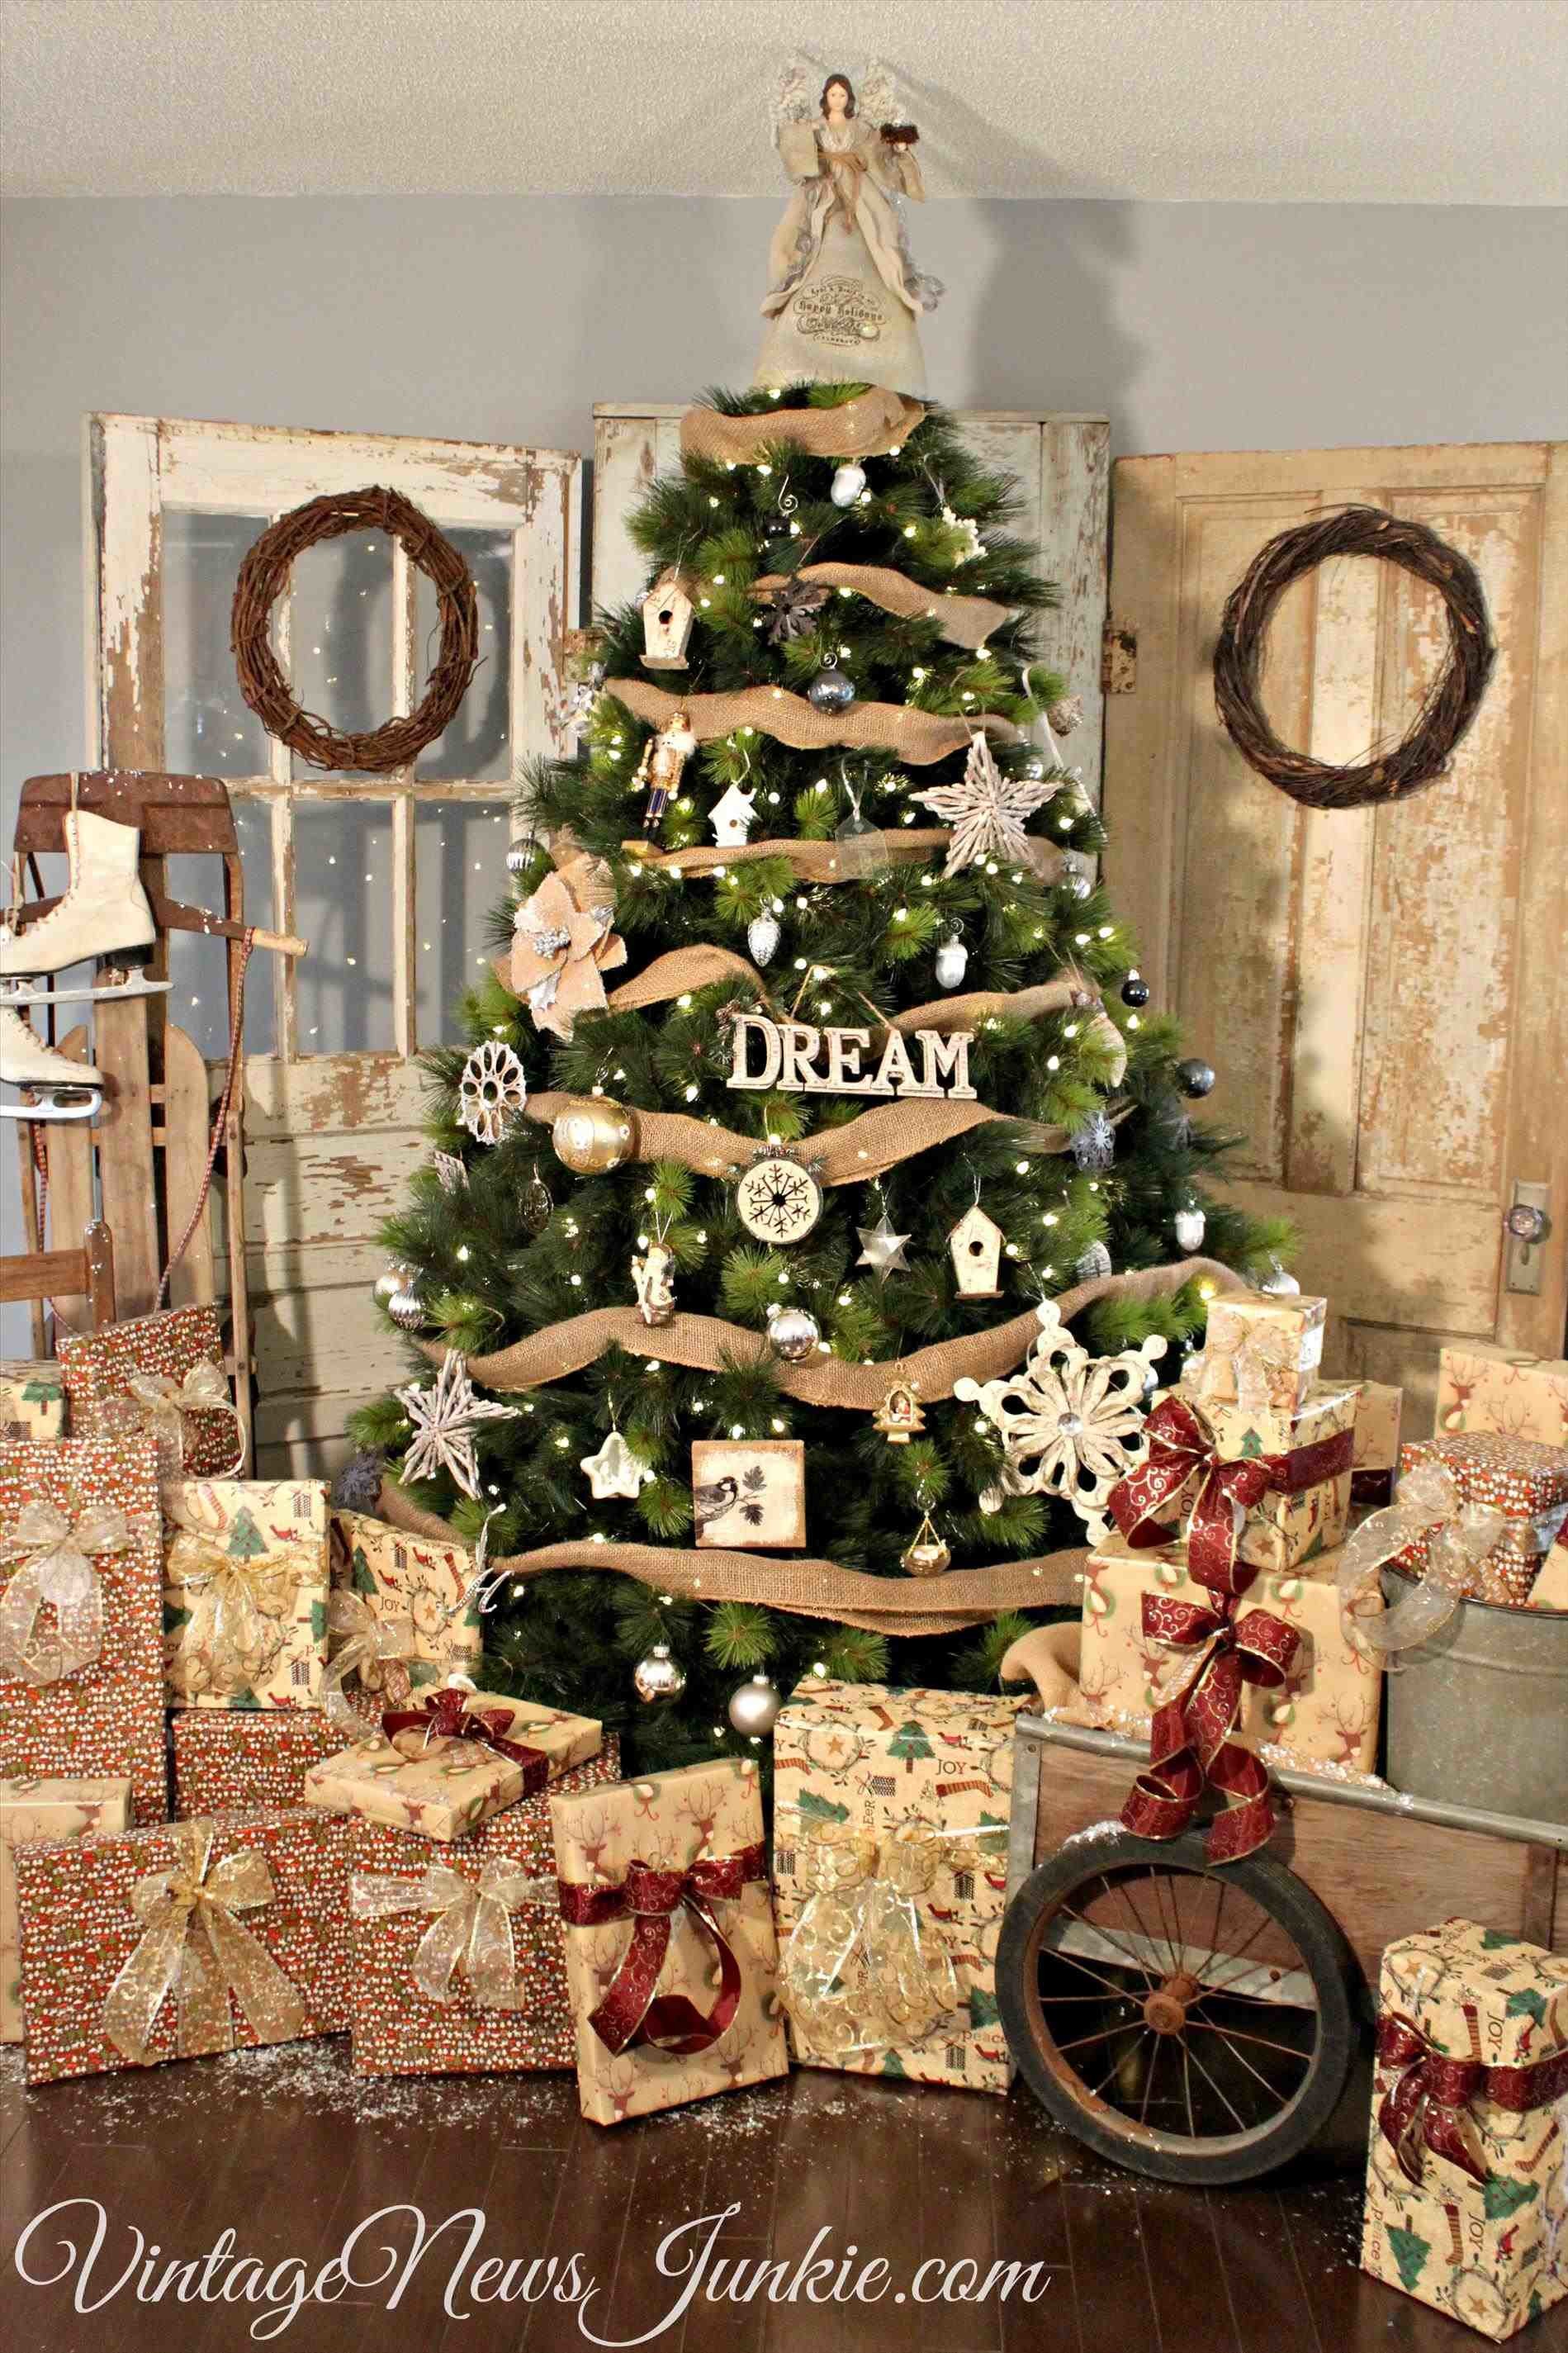 1899x2849 rustic christmas tree ideas 2016 best decorated the artificial classic  traditional decorations youtube classic rustic -